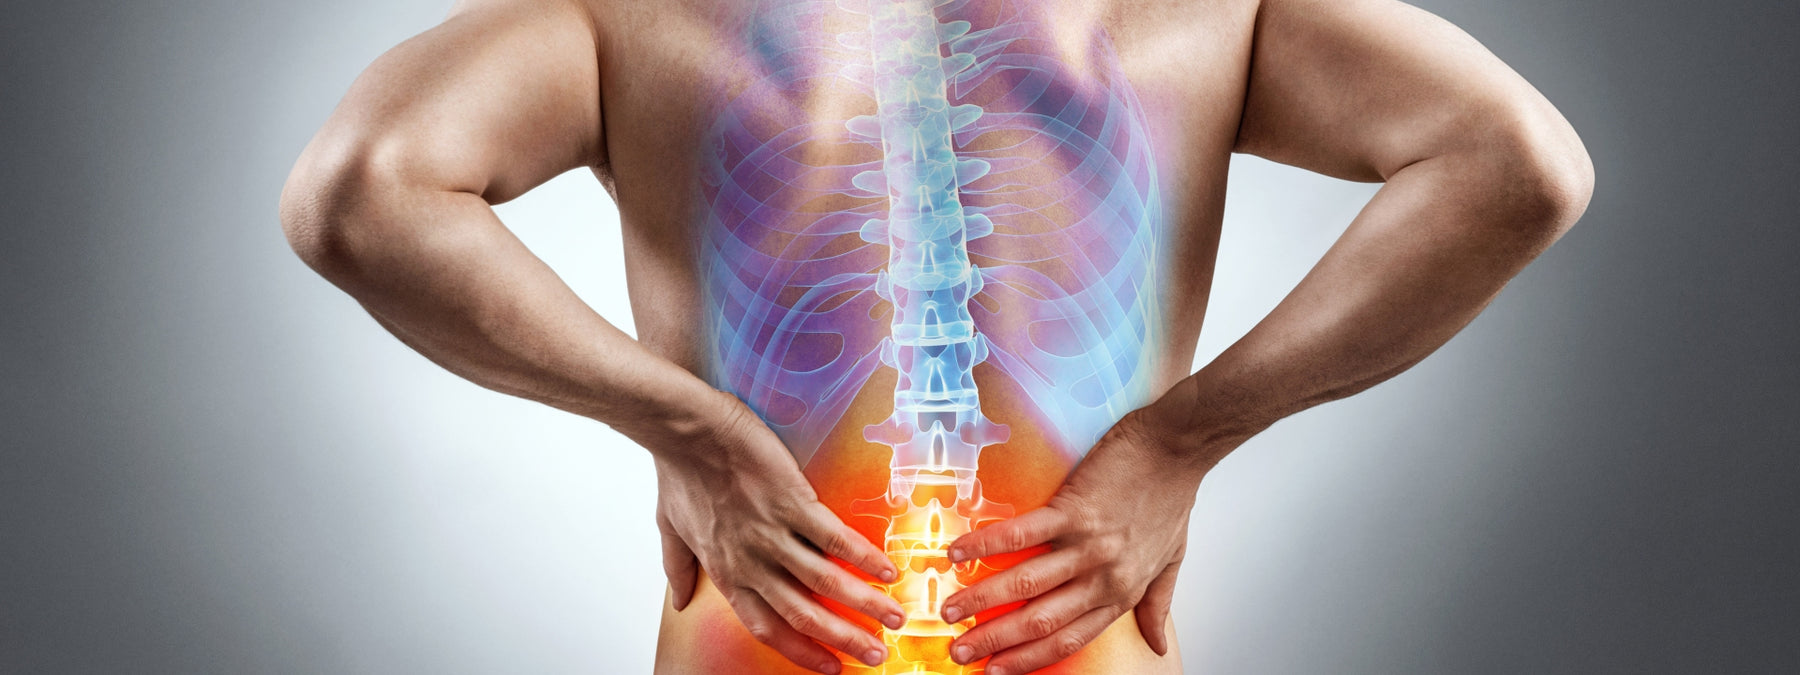 Ease Lower Back Pain Now With These 10 Simple Exercises